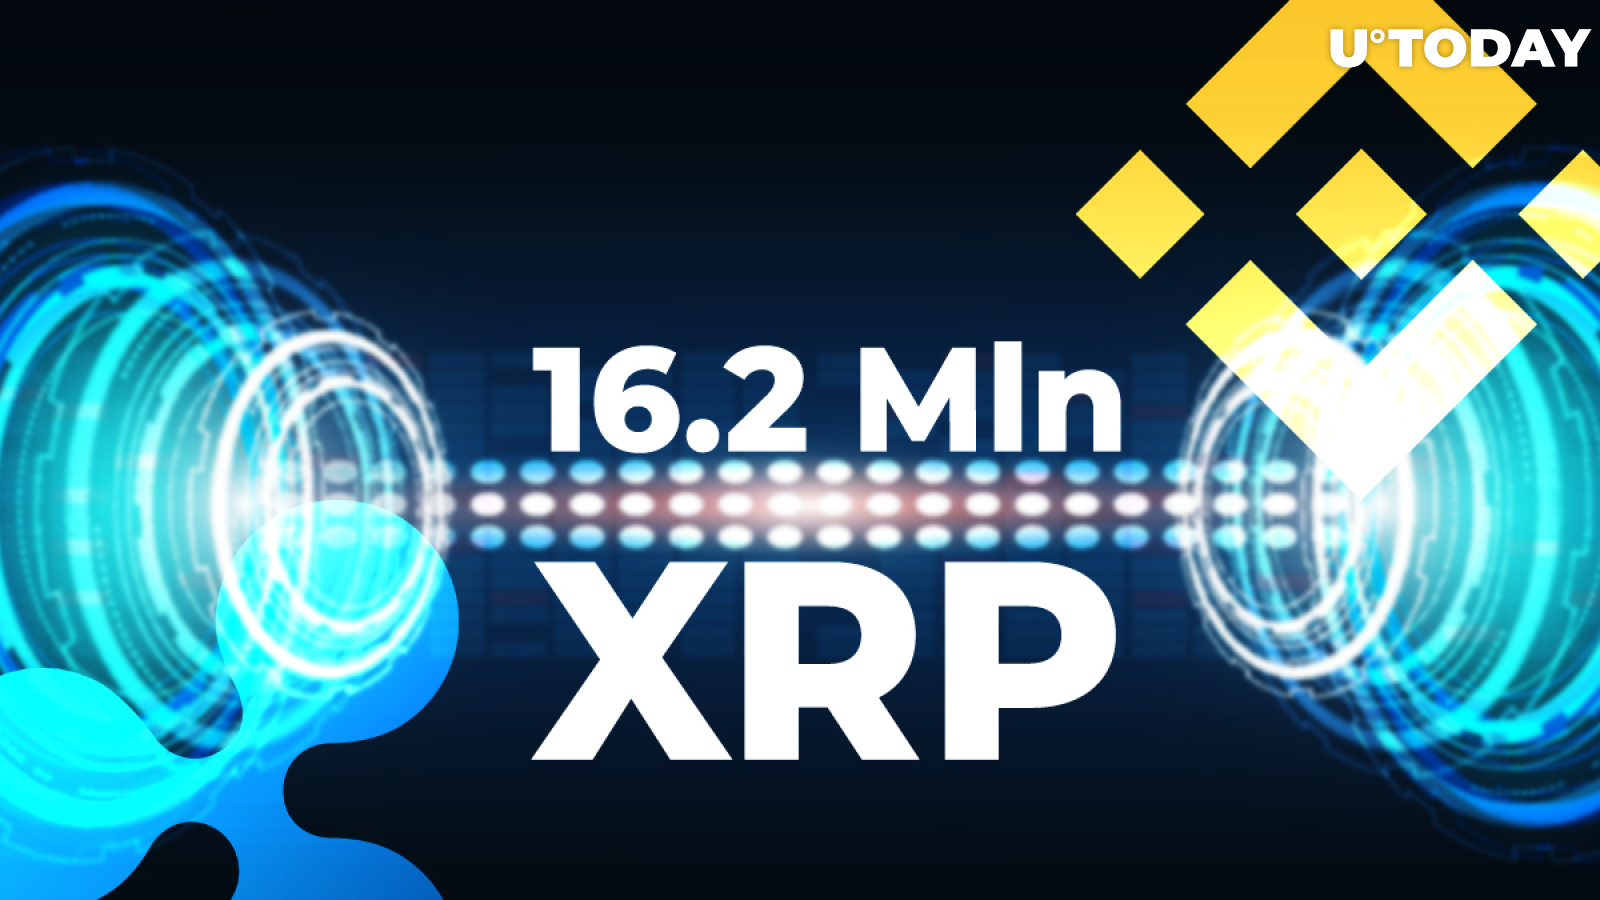 Ripple Catches 16.2 Mln XRP from Binance, While Jed McCaleb Dumps Another XRP Lump